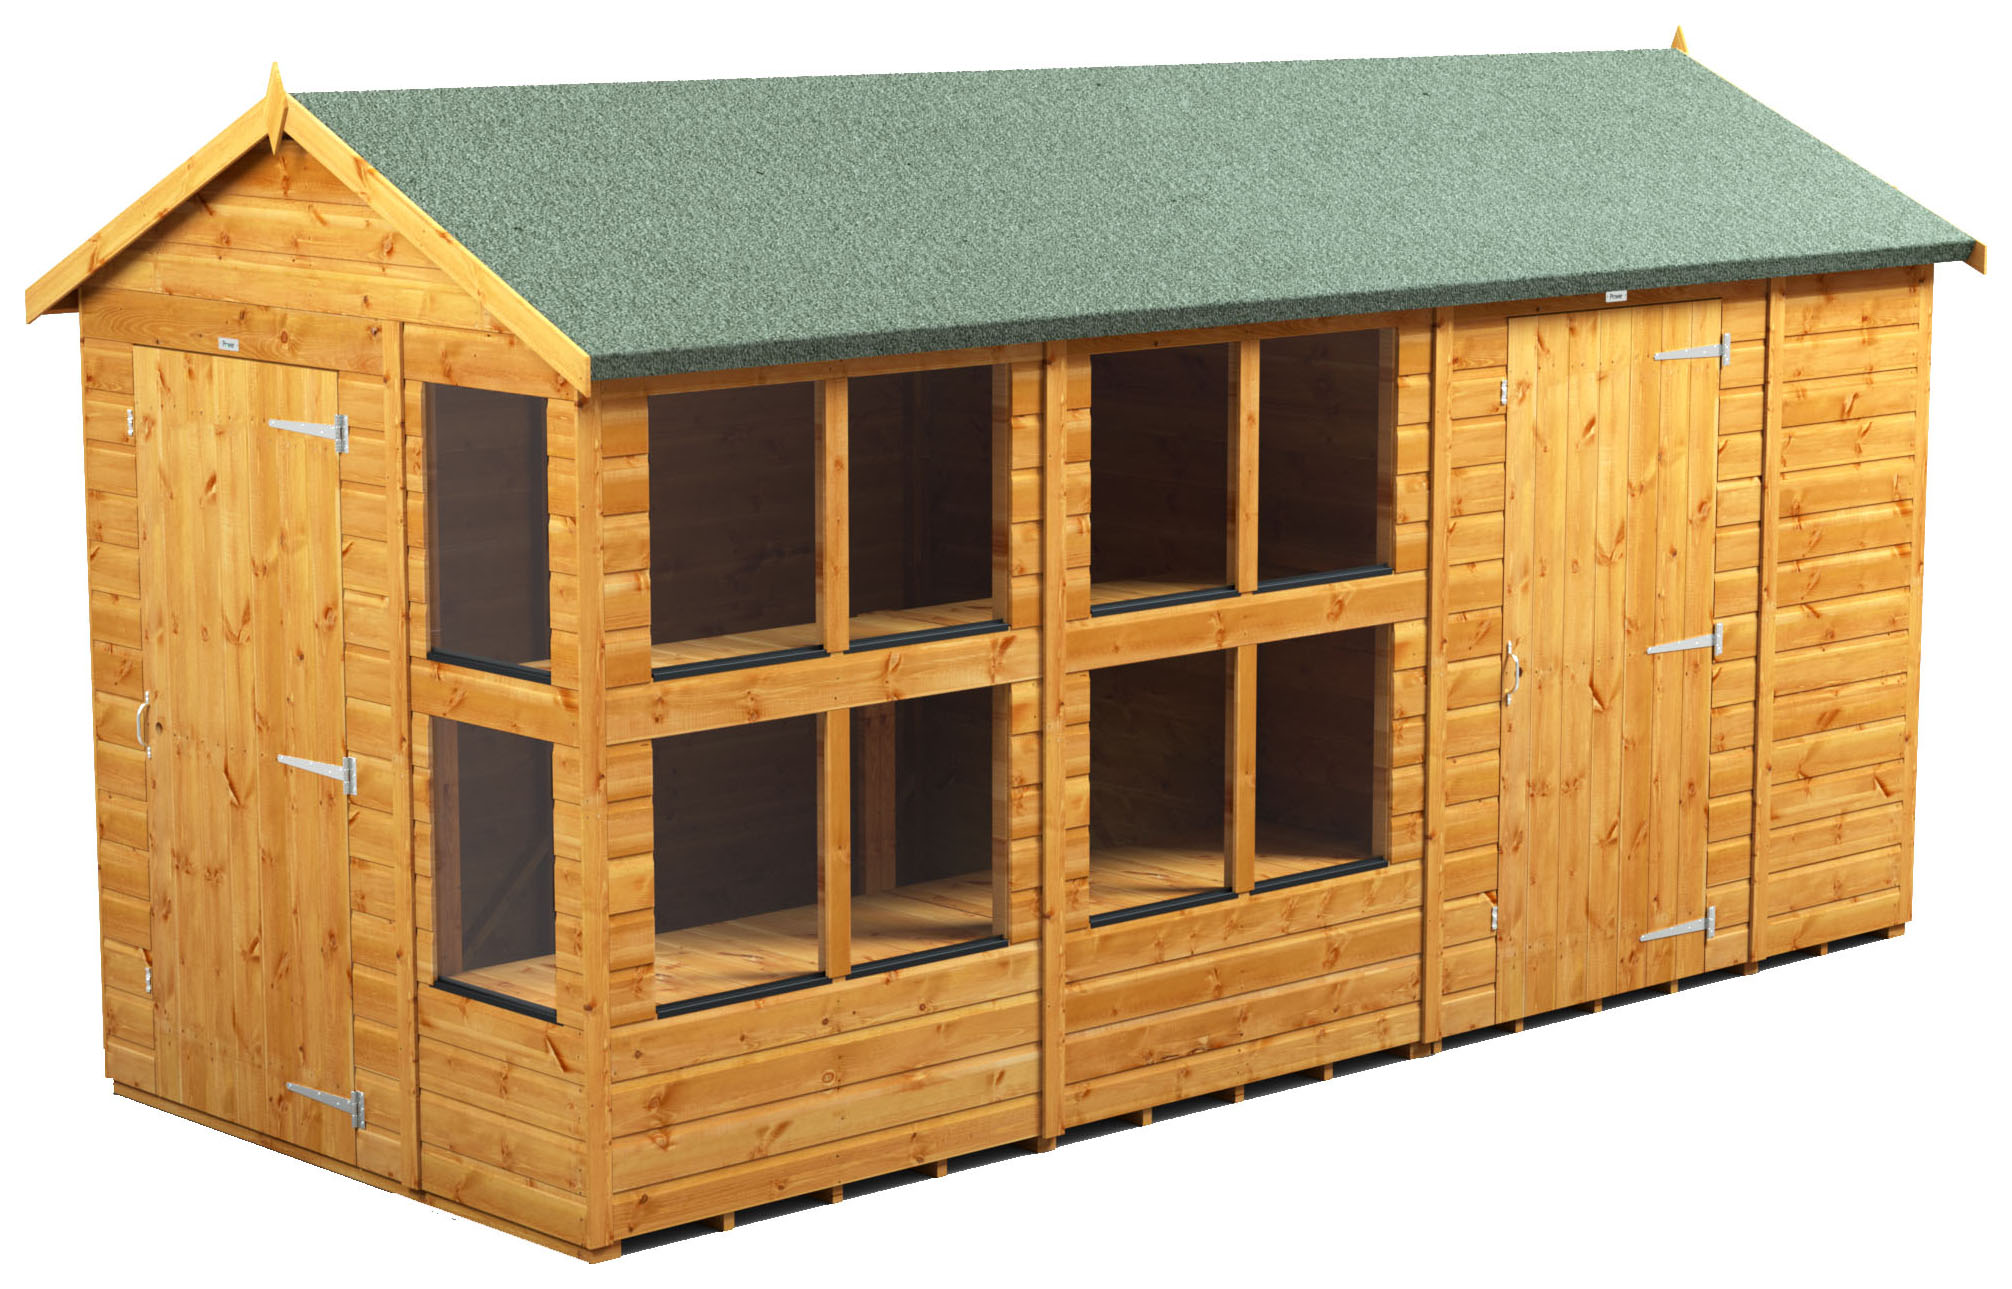 Power Sheds 14 x 6ft Apex Shiplap Dip Treated Potting Shed - Including Side Store